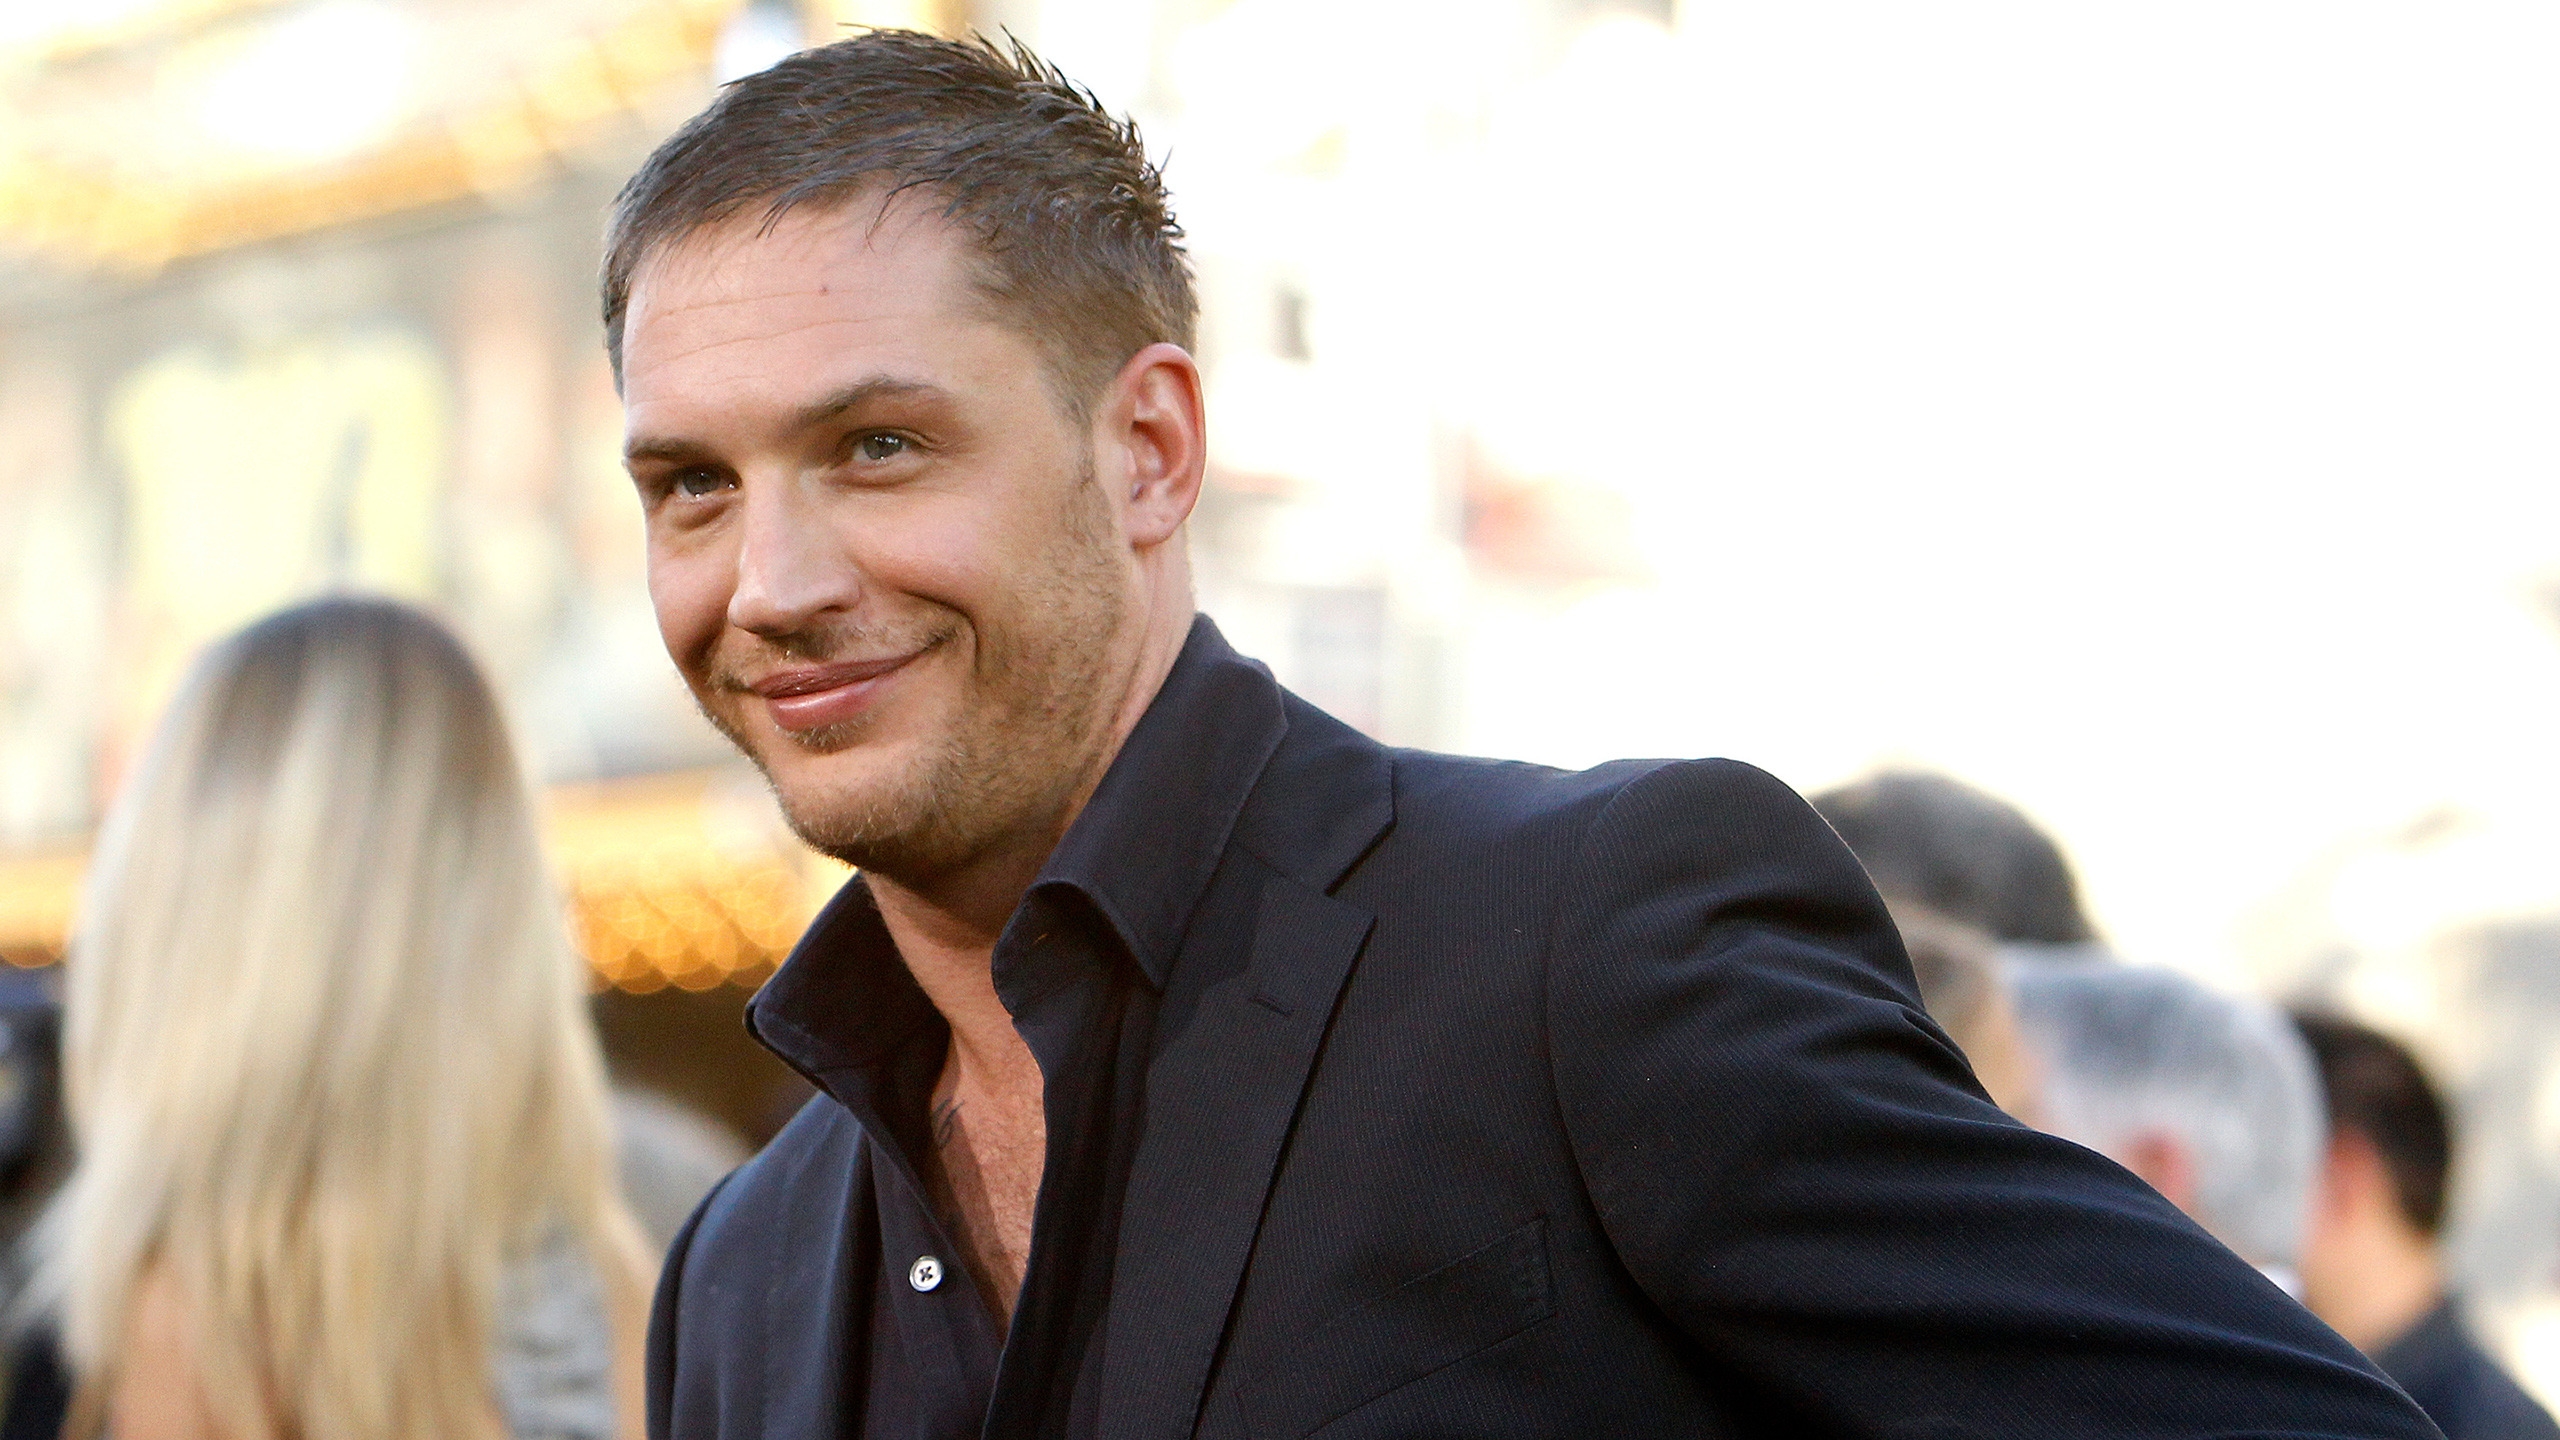 Cute Tom Hardy for 2560x1440 HDTV resolution